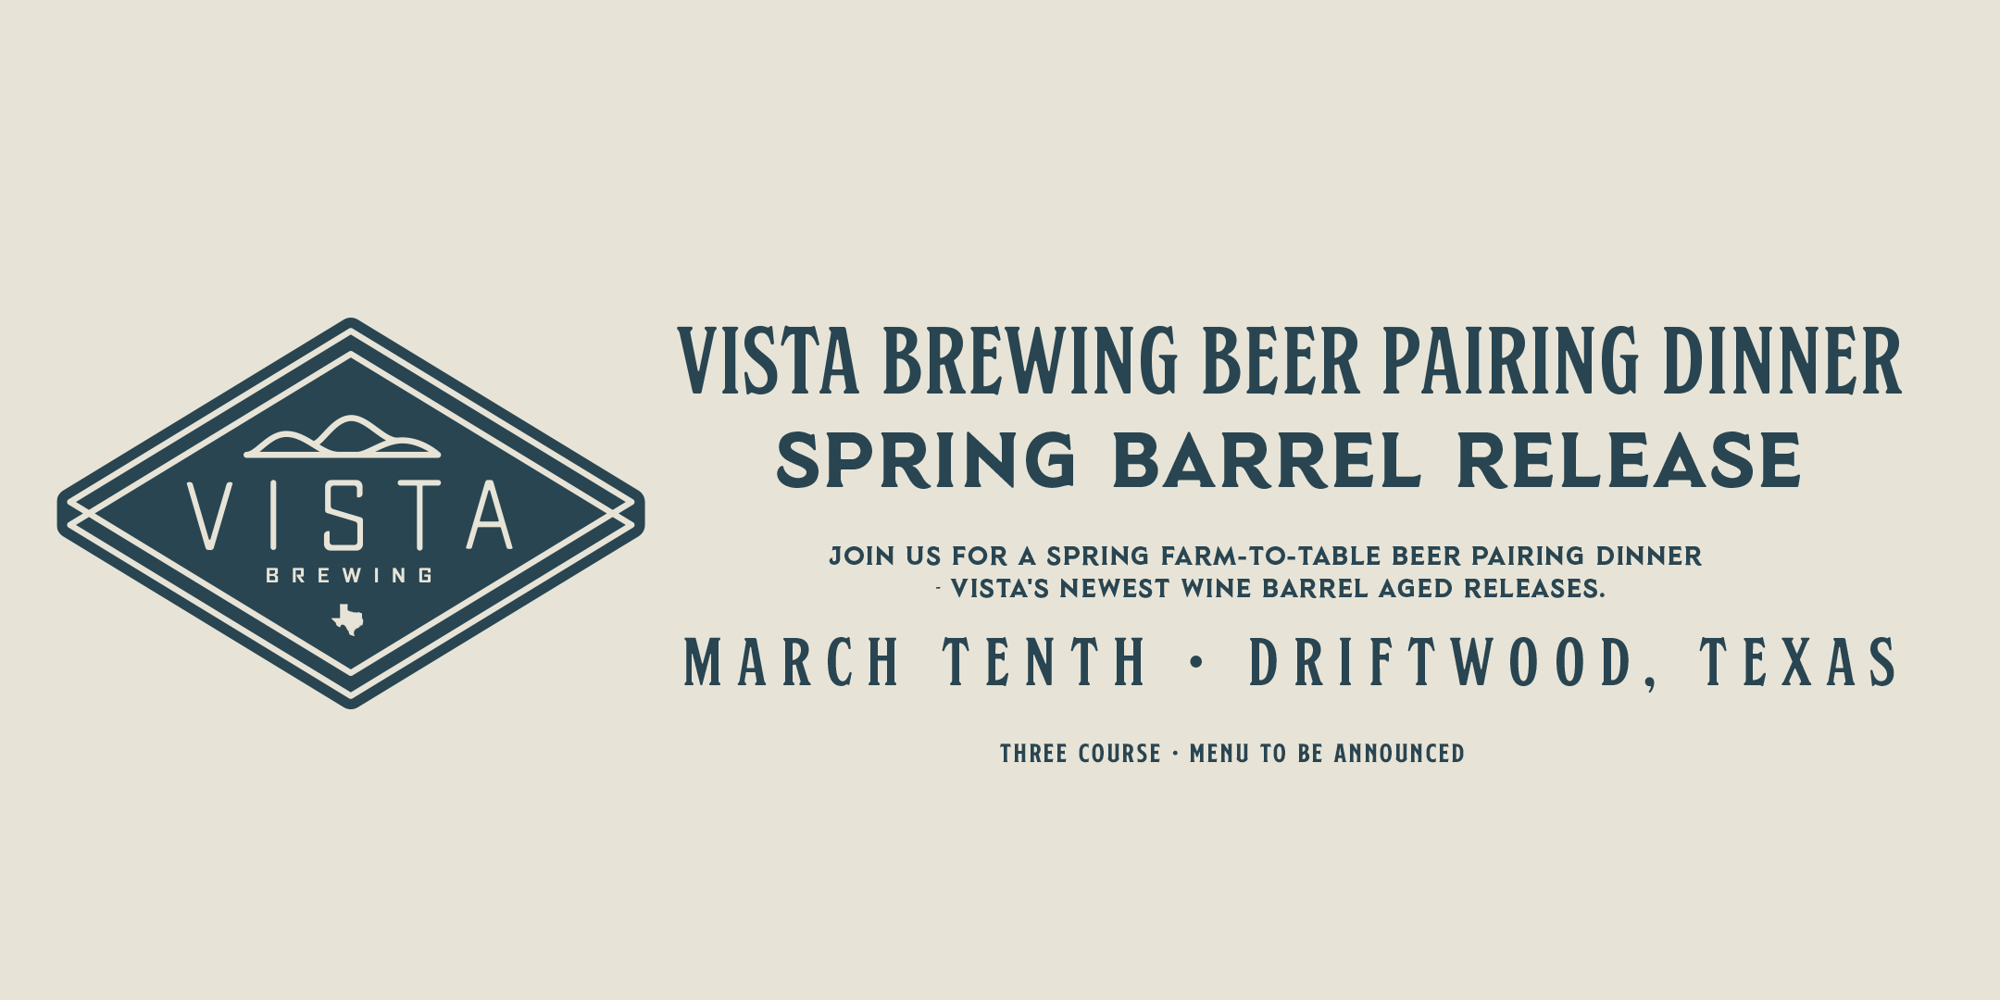 Vista Brewing Farm-to-Table Beer Pairing Dinner promotional image